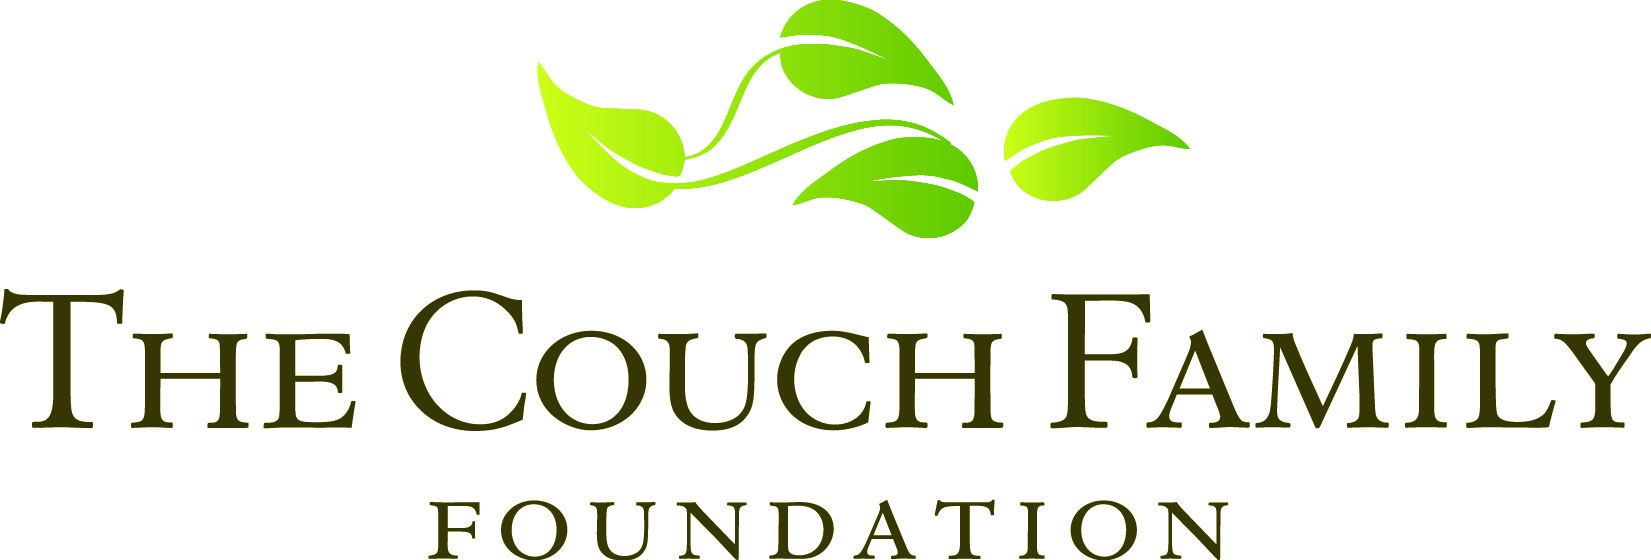 The Couch Family Foundation